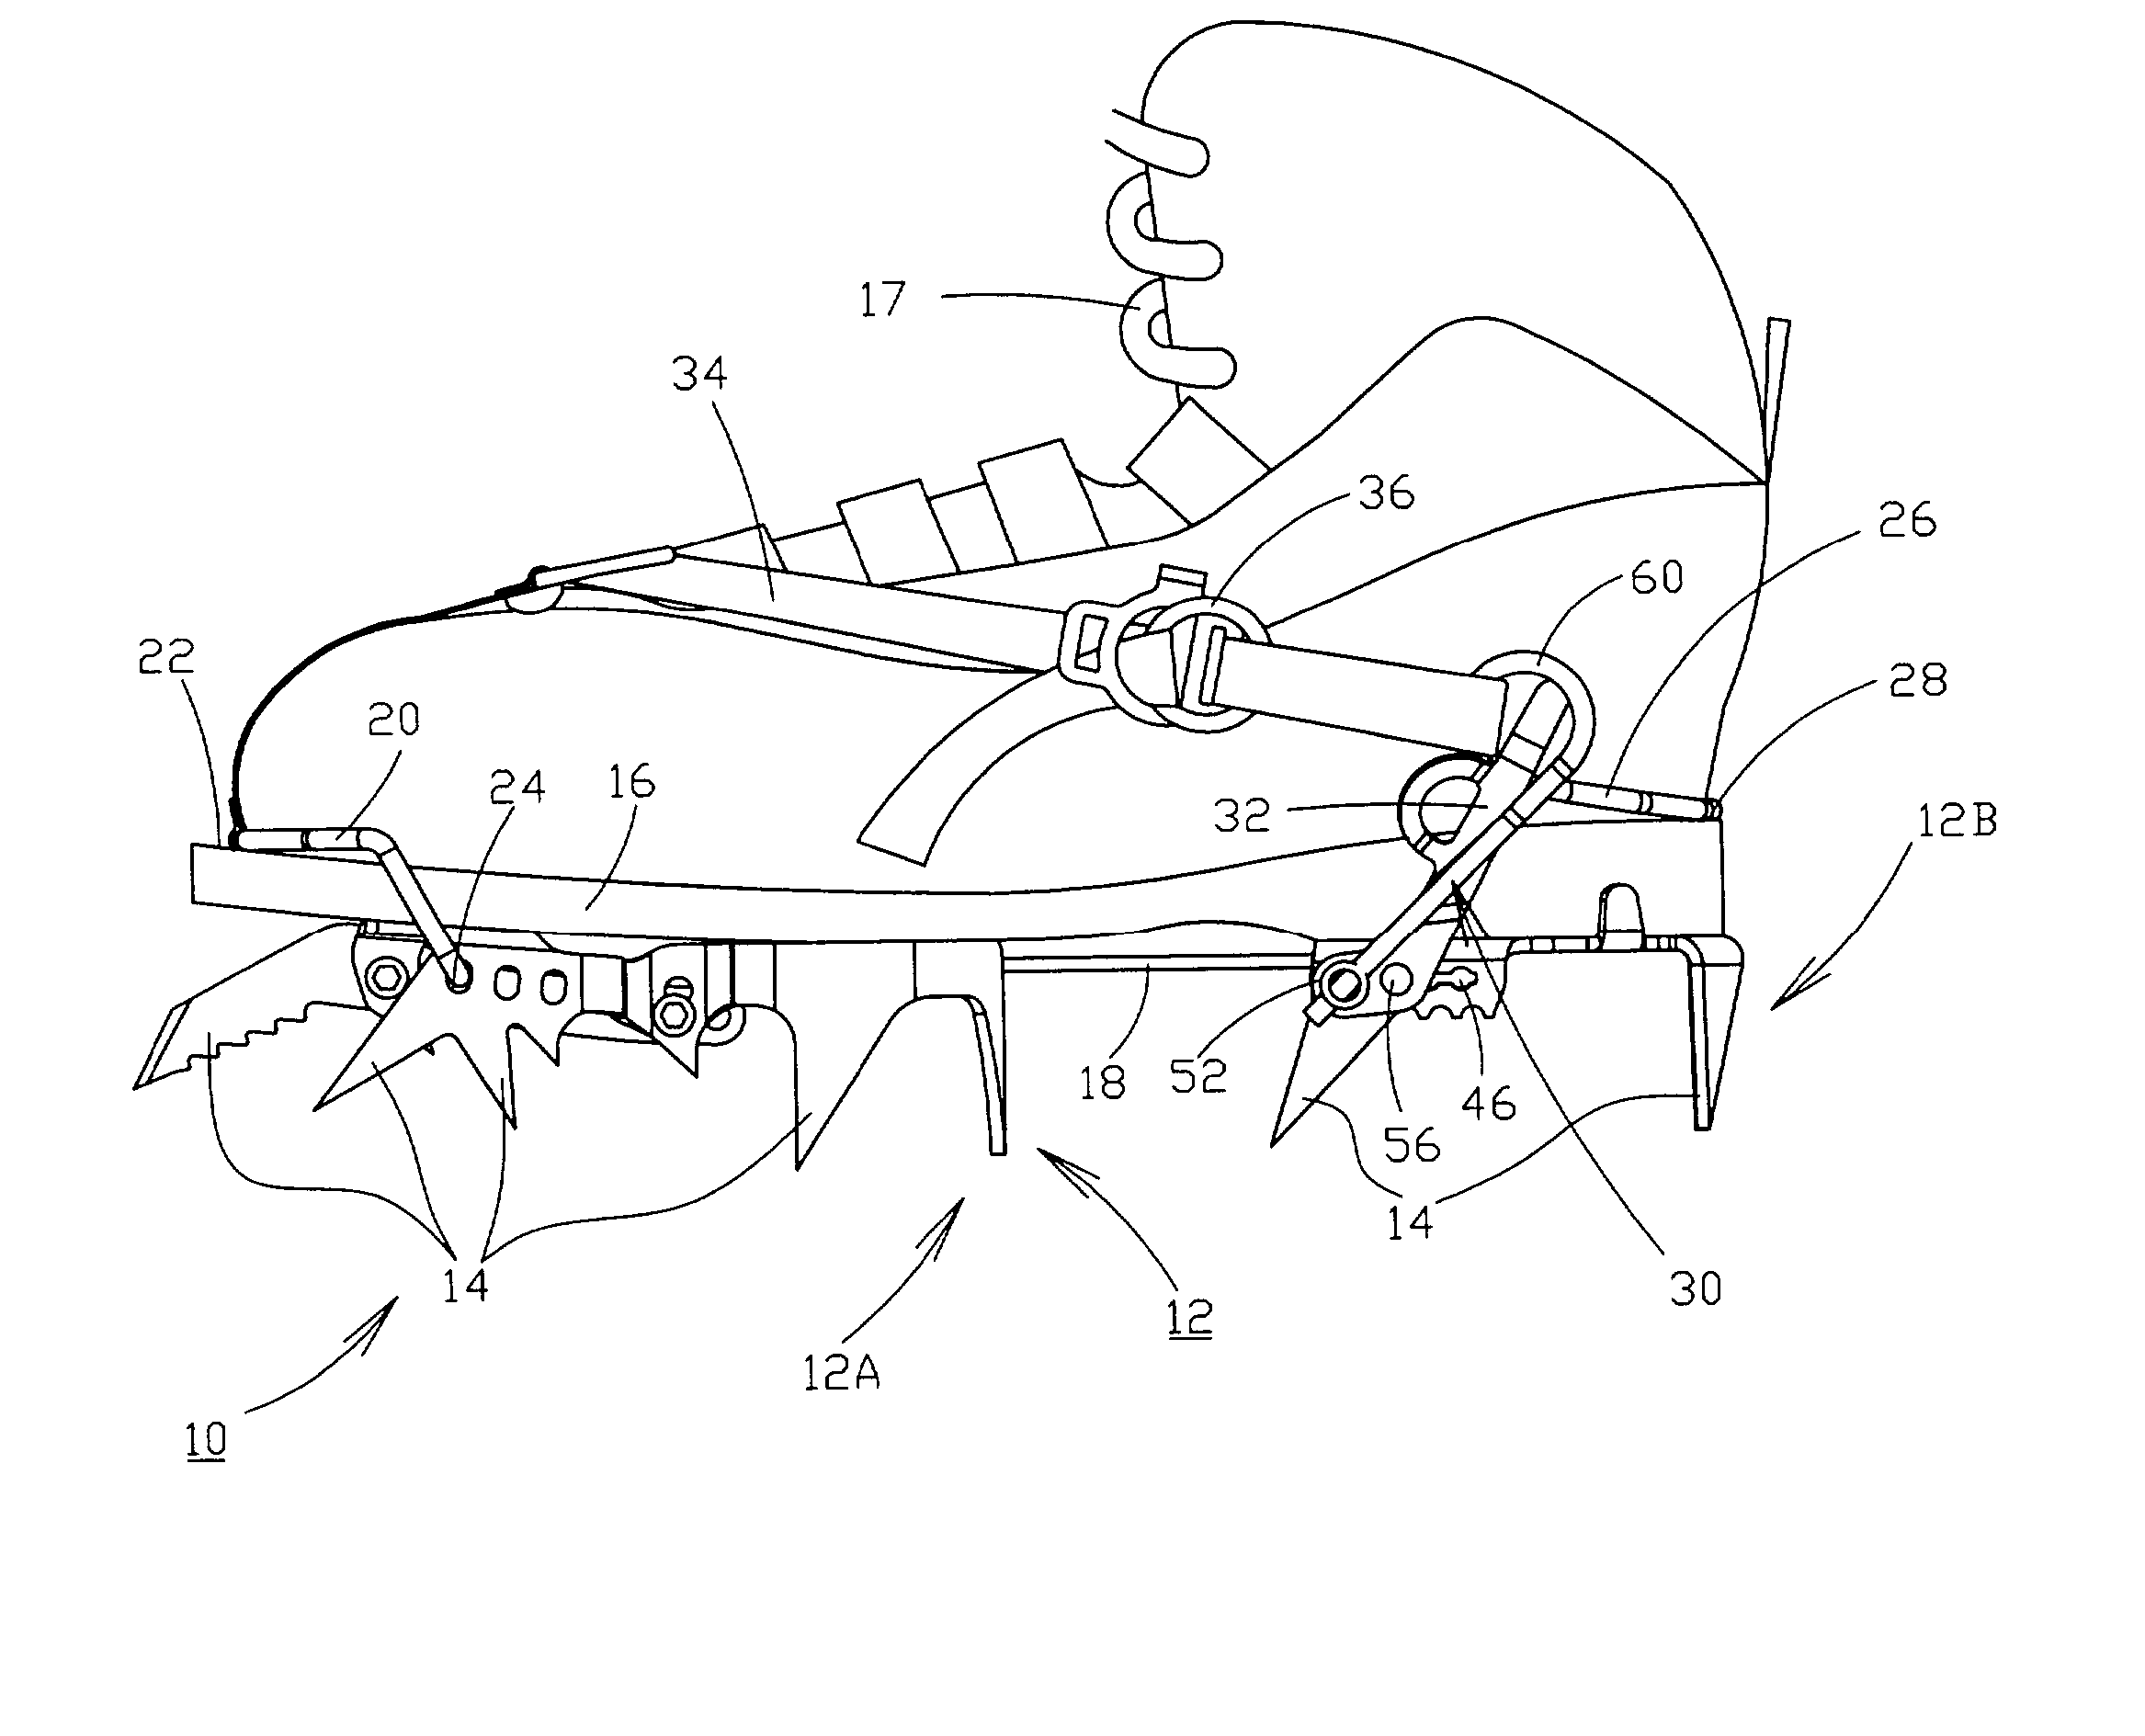 Ice crampon for mountain climbing fitted with a fastening device with a lateral operating lever